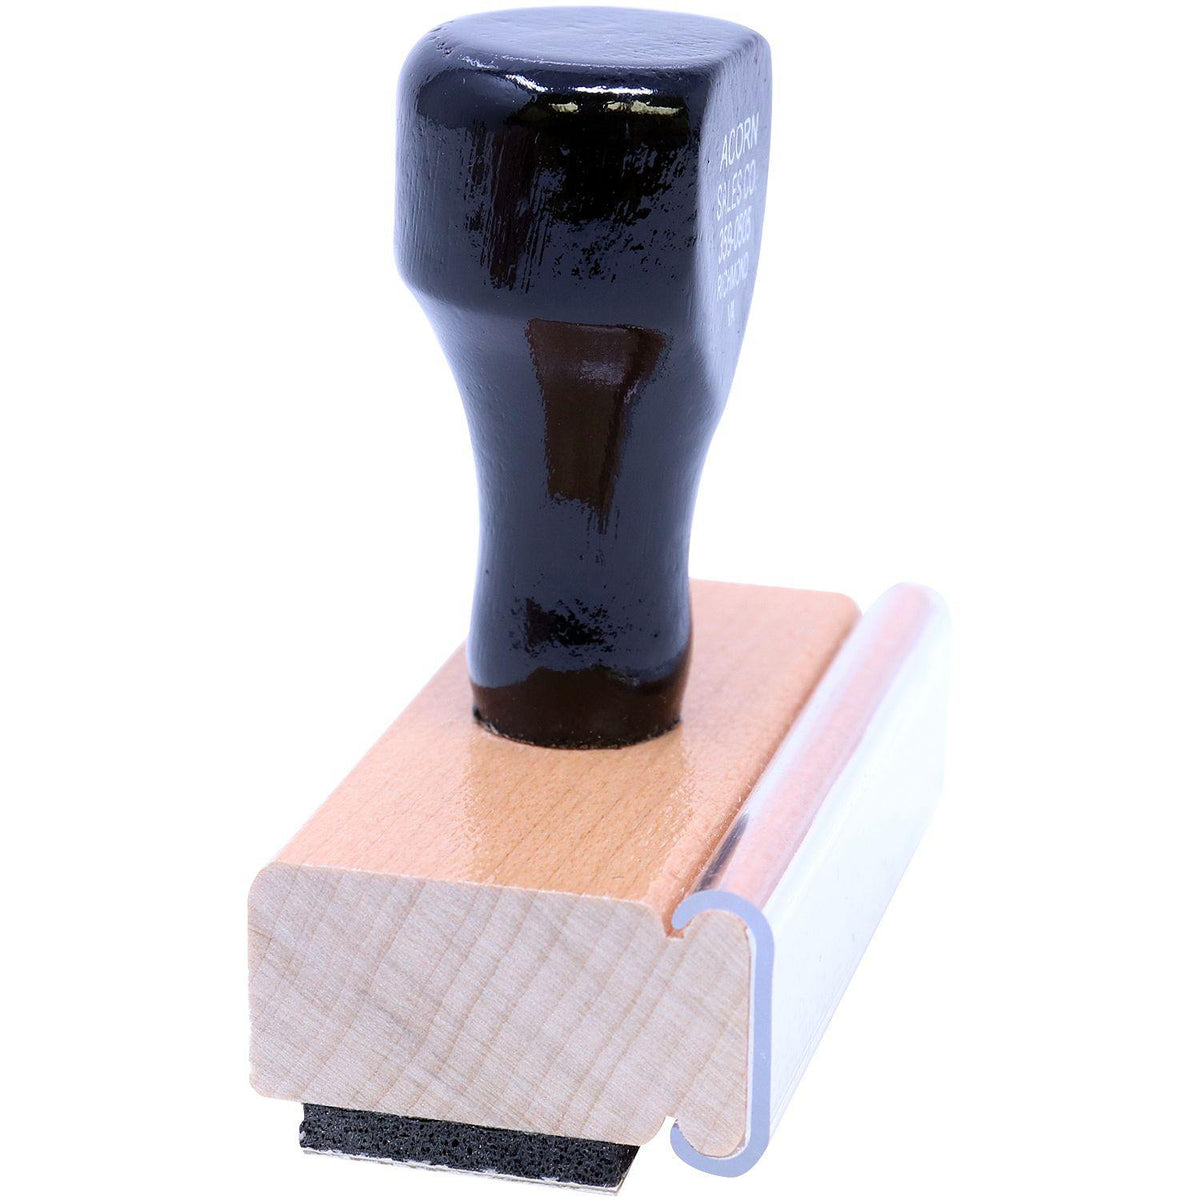 Side View of Barcode Confidential Rubber Stamp at an Angle